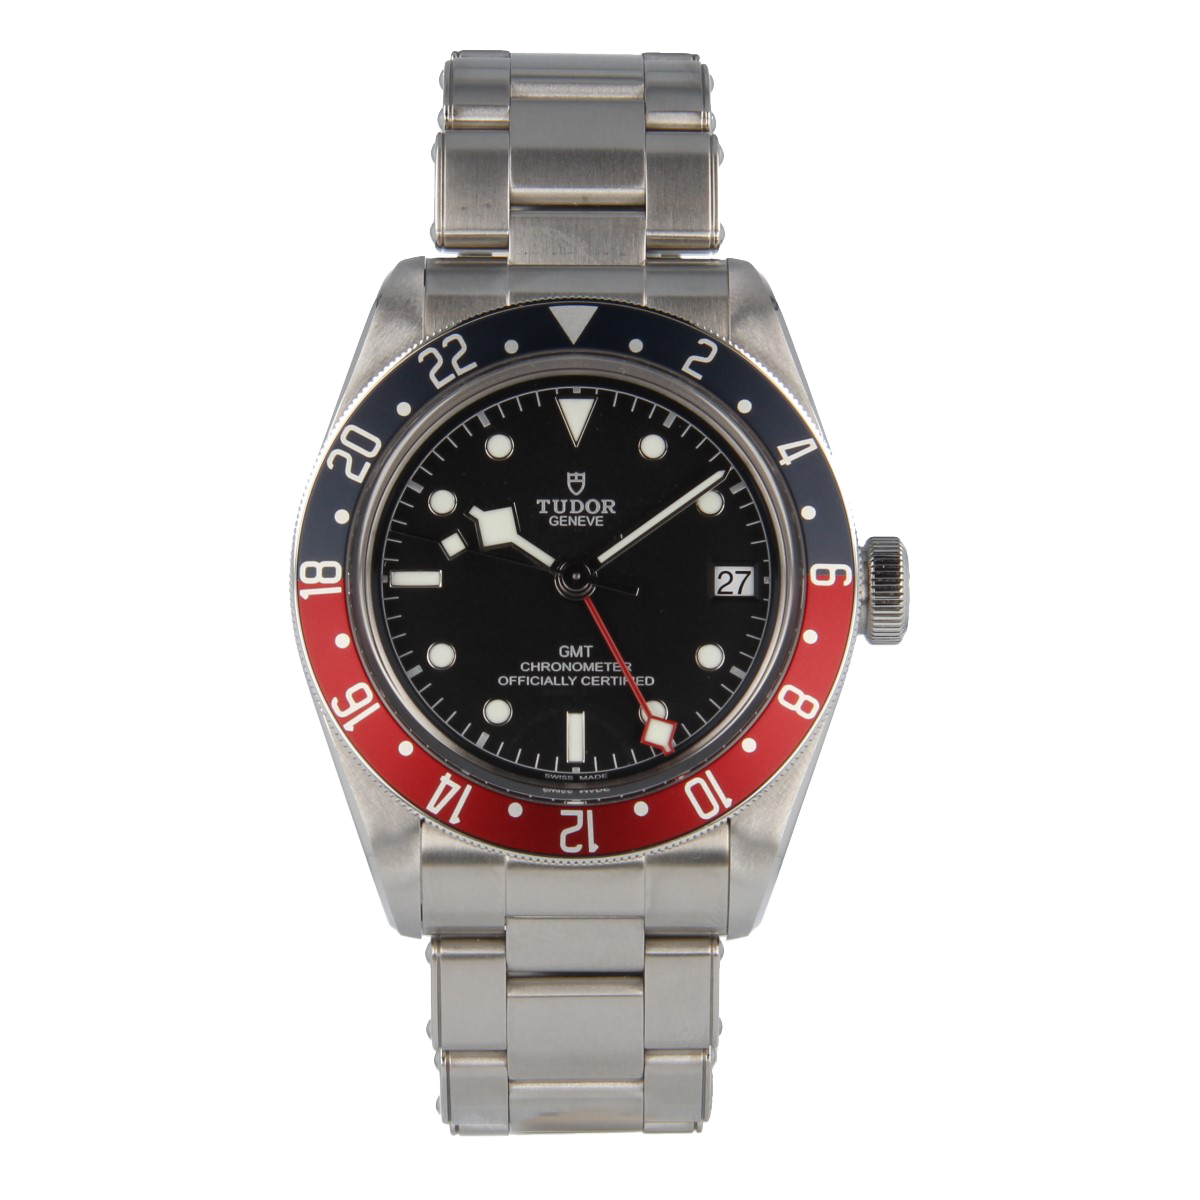 Tudor Black Bay GMT 79830RB - Complete with original box and paper | Buy pre owned Tudor Watch